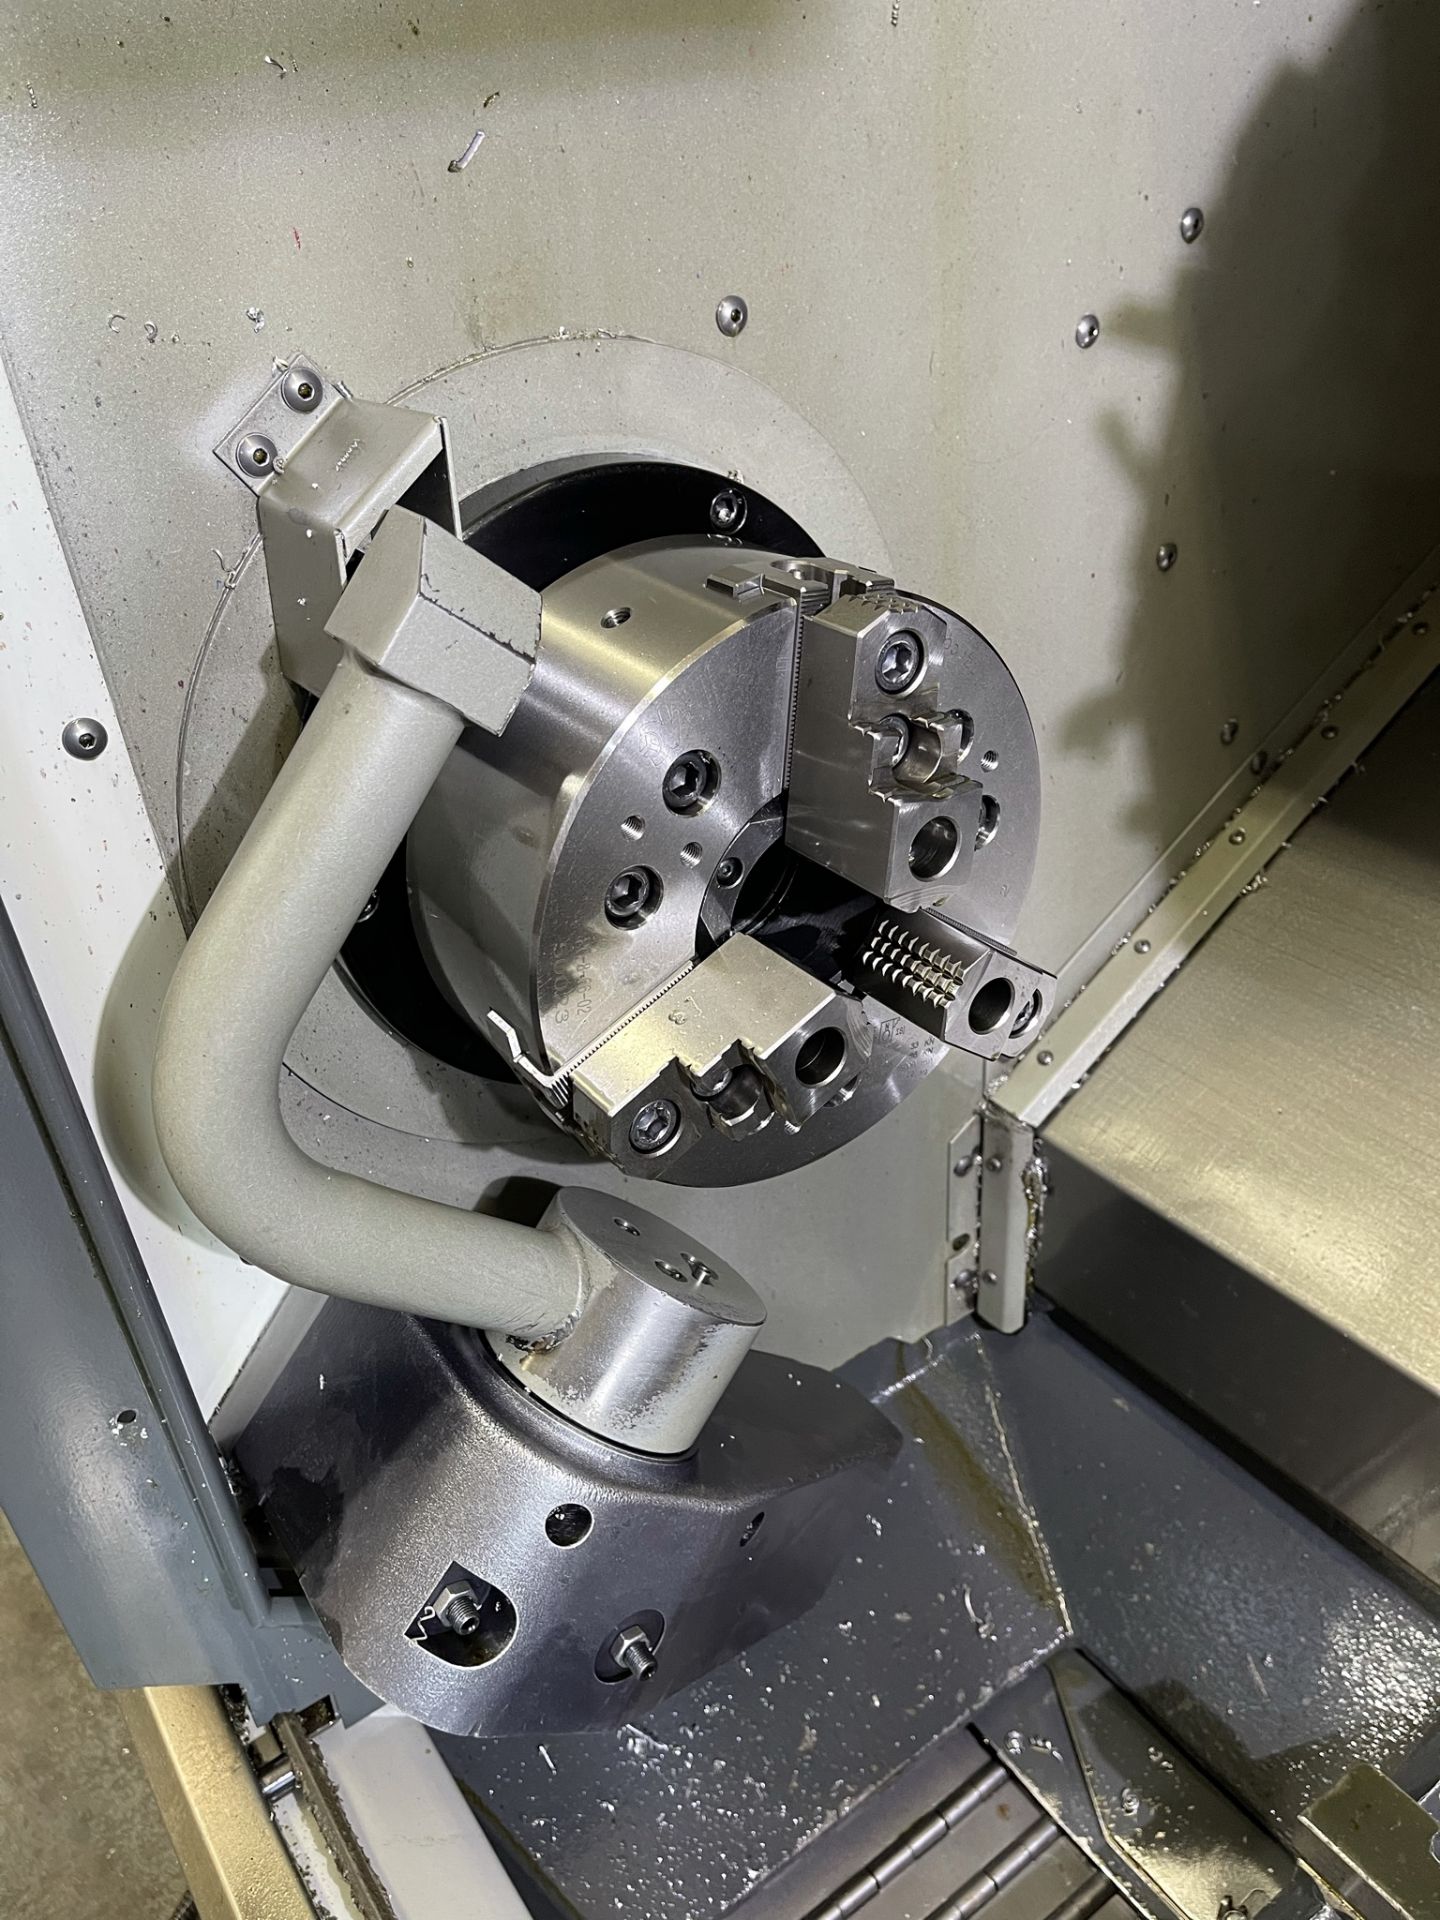 2016 HAAS ST-15 TURNING CENTER, 8" 3-JAW CHUCK, 16" SWING, 12-STATION TURRET, 4,000 RPM, 2.5" BAR - Image 19 of 27